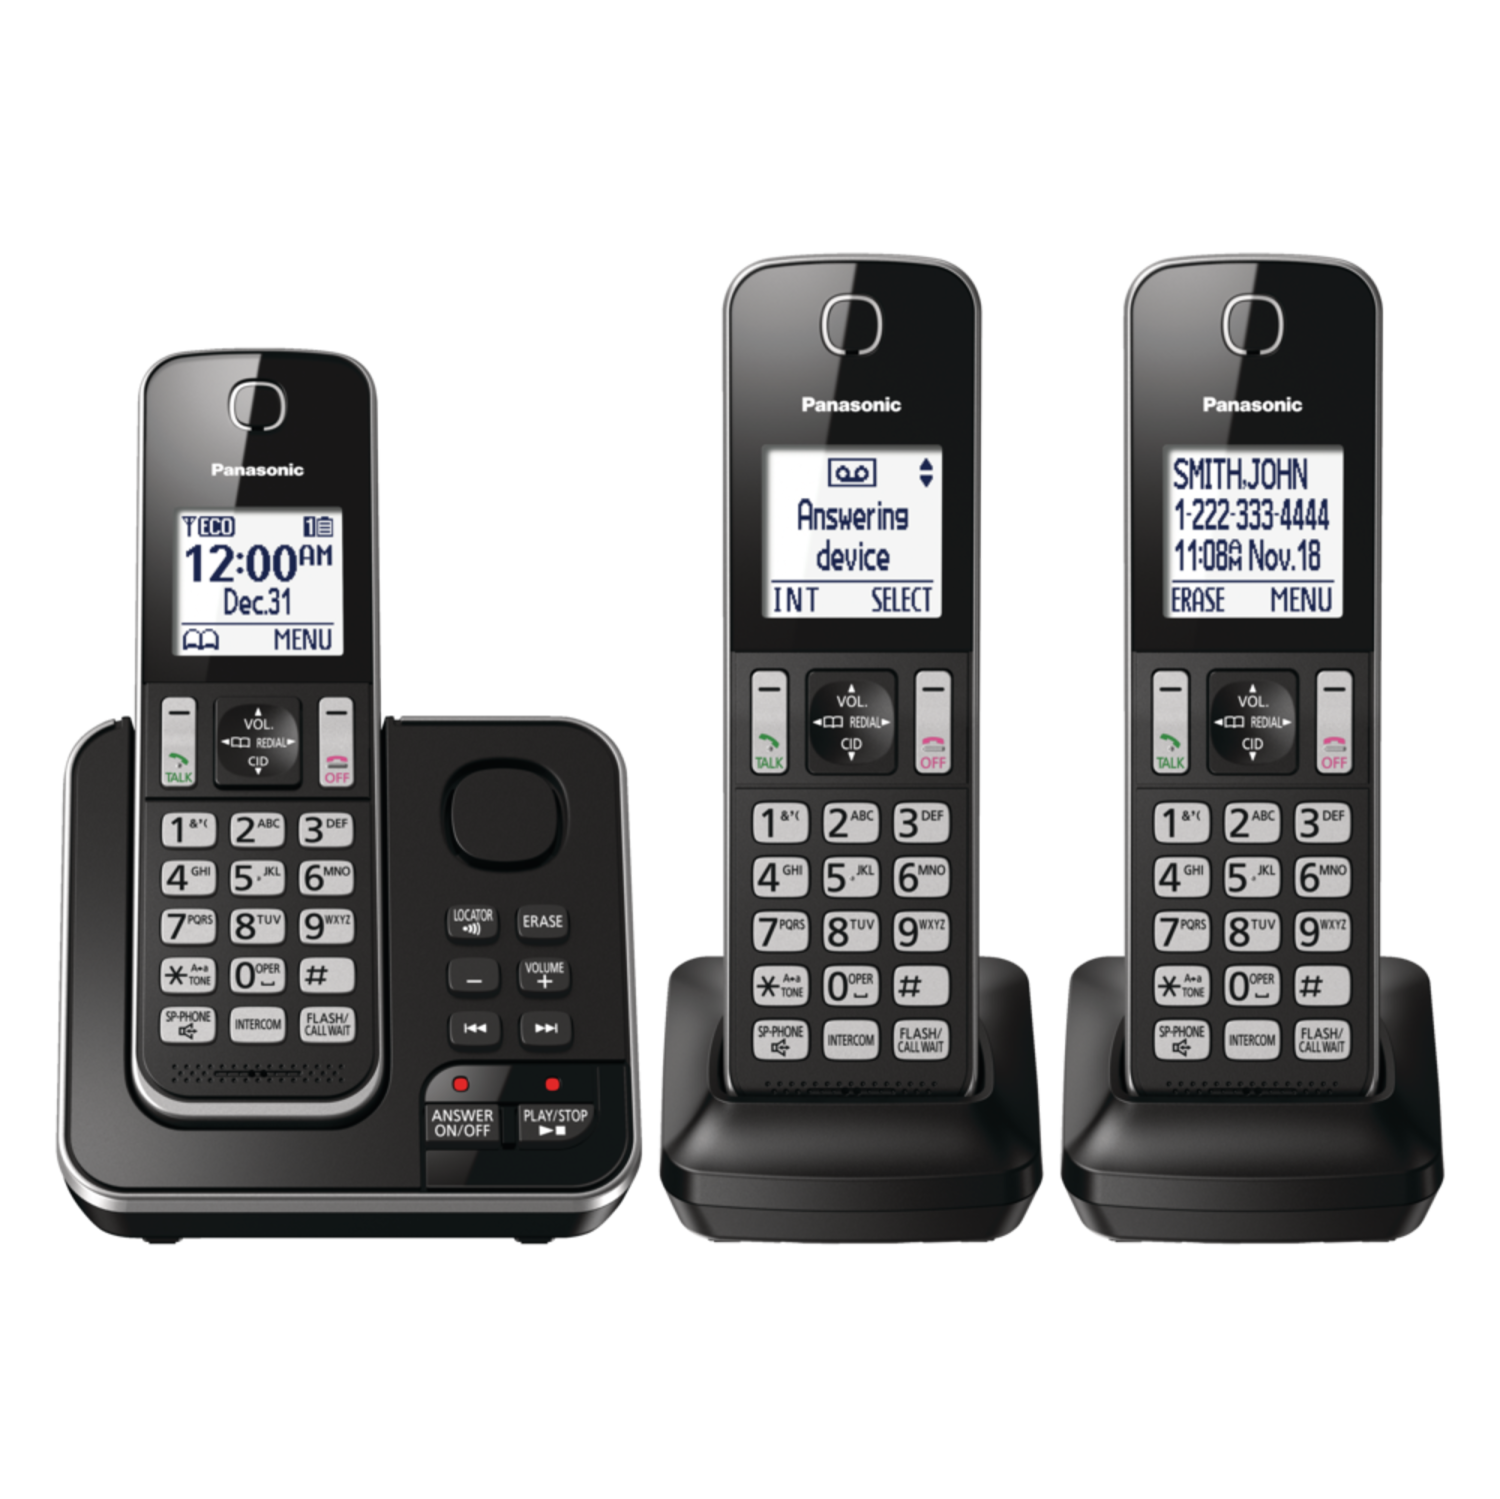 Panasonic DECT 6.0 Cordless Phones with Digital Answering System, 3 Handsets, Black